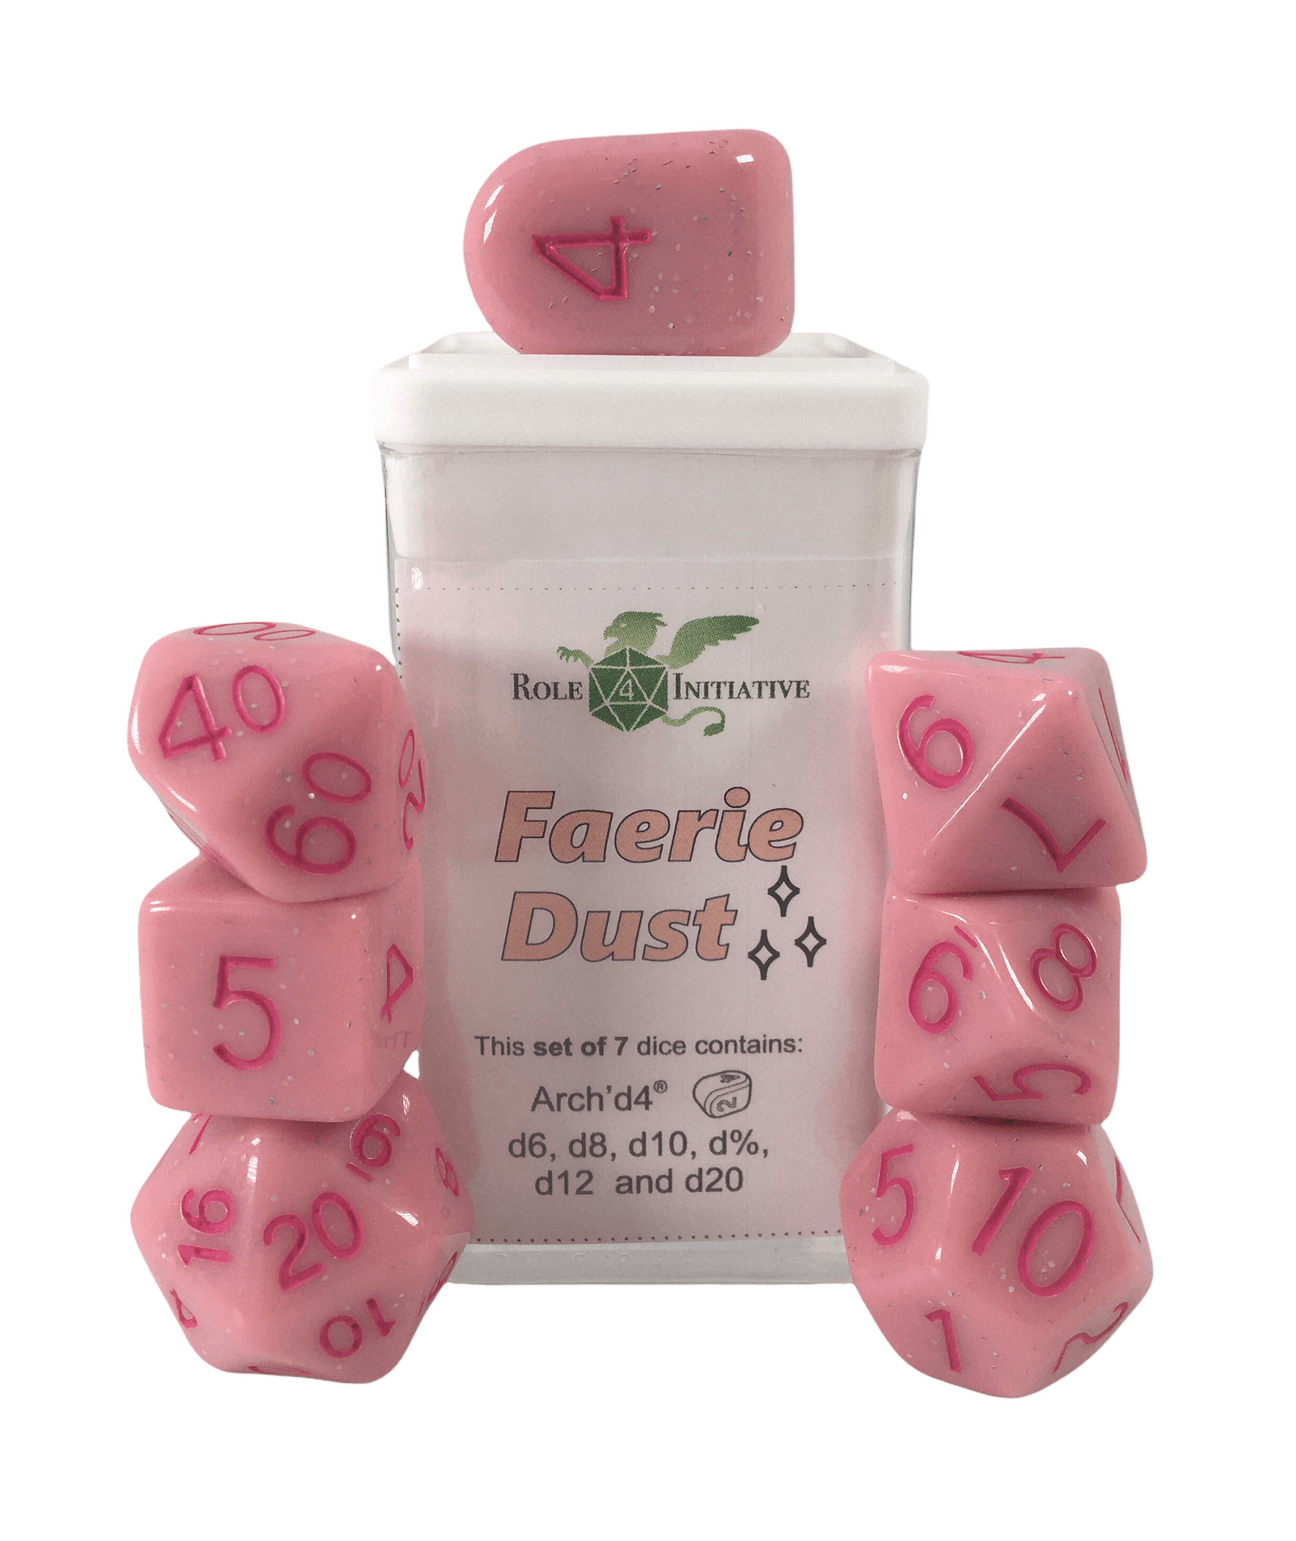 Faerie Dust - 7 dice set (with Arch’d4™) - The Fourth Place